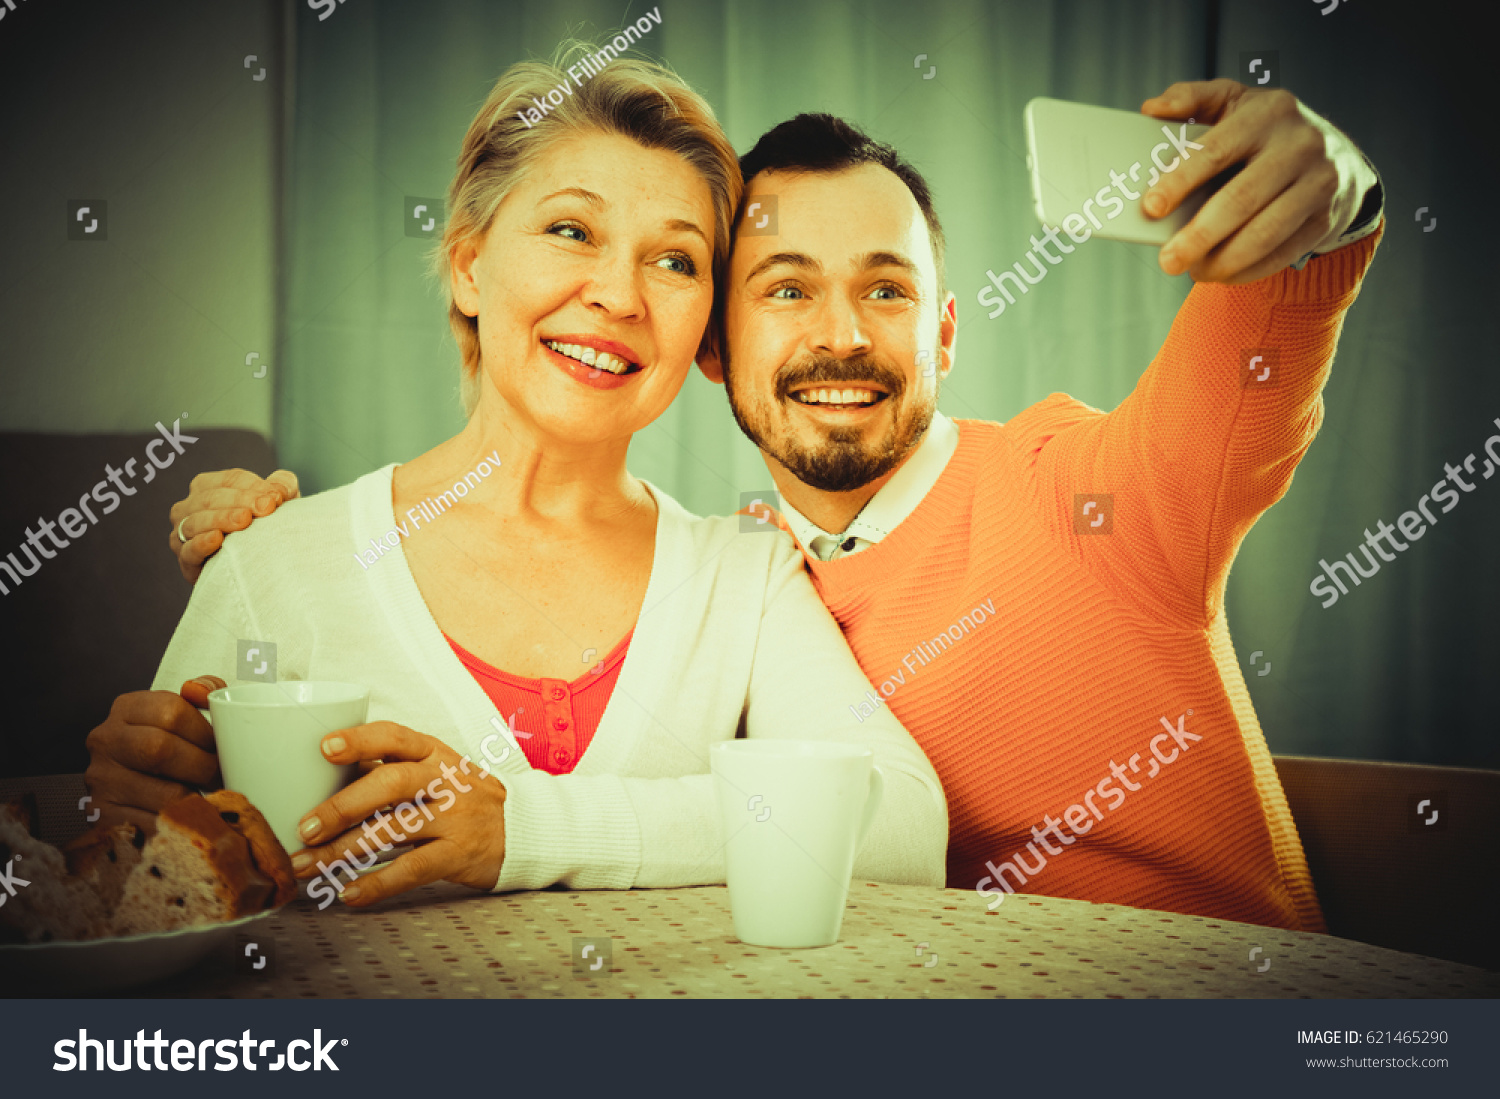 Smiling mother and adult son photographing together at home #621465290